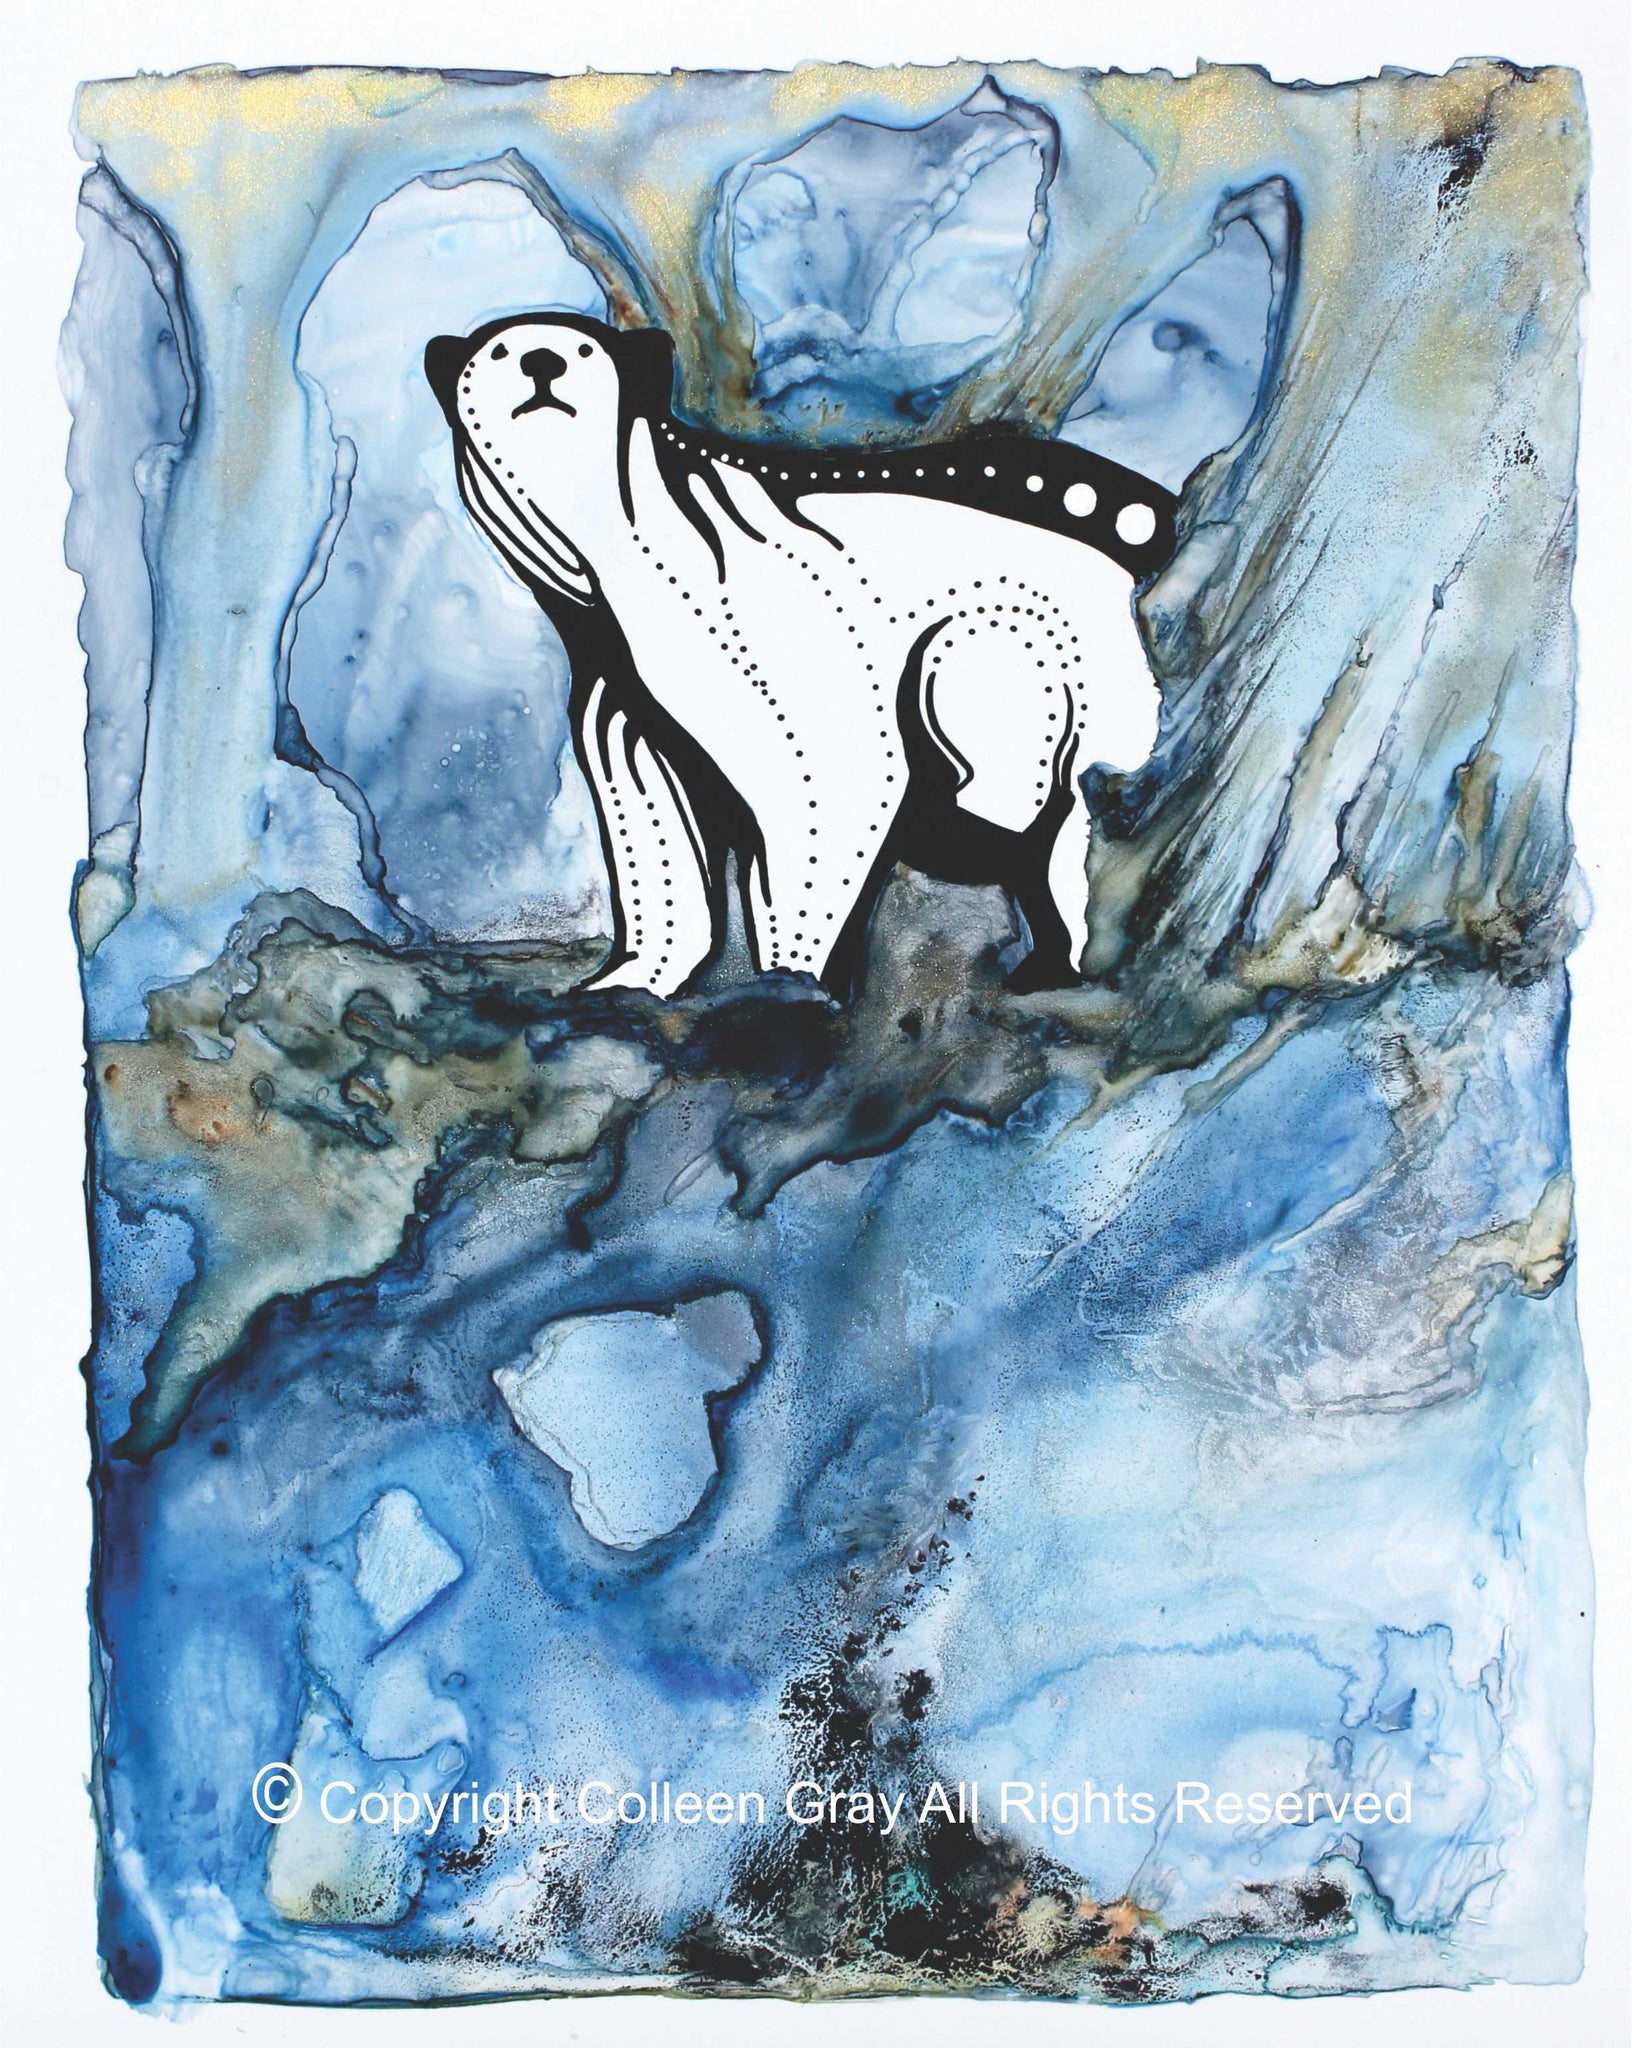 mage of Title: The Ice Cave 16x20 archival print by Metis Artist Colleen Gray Indigenous Canadian Art Work. Vertical. Polar bear. For sale at https://artforaidshop.ca